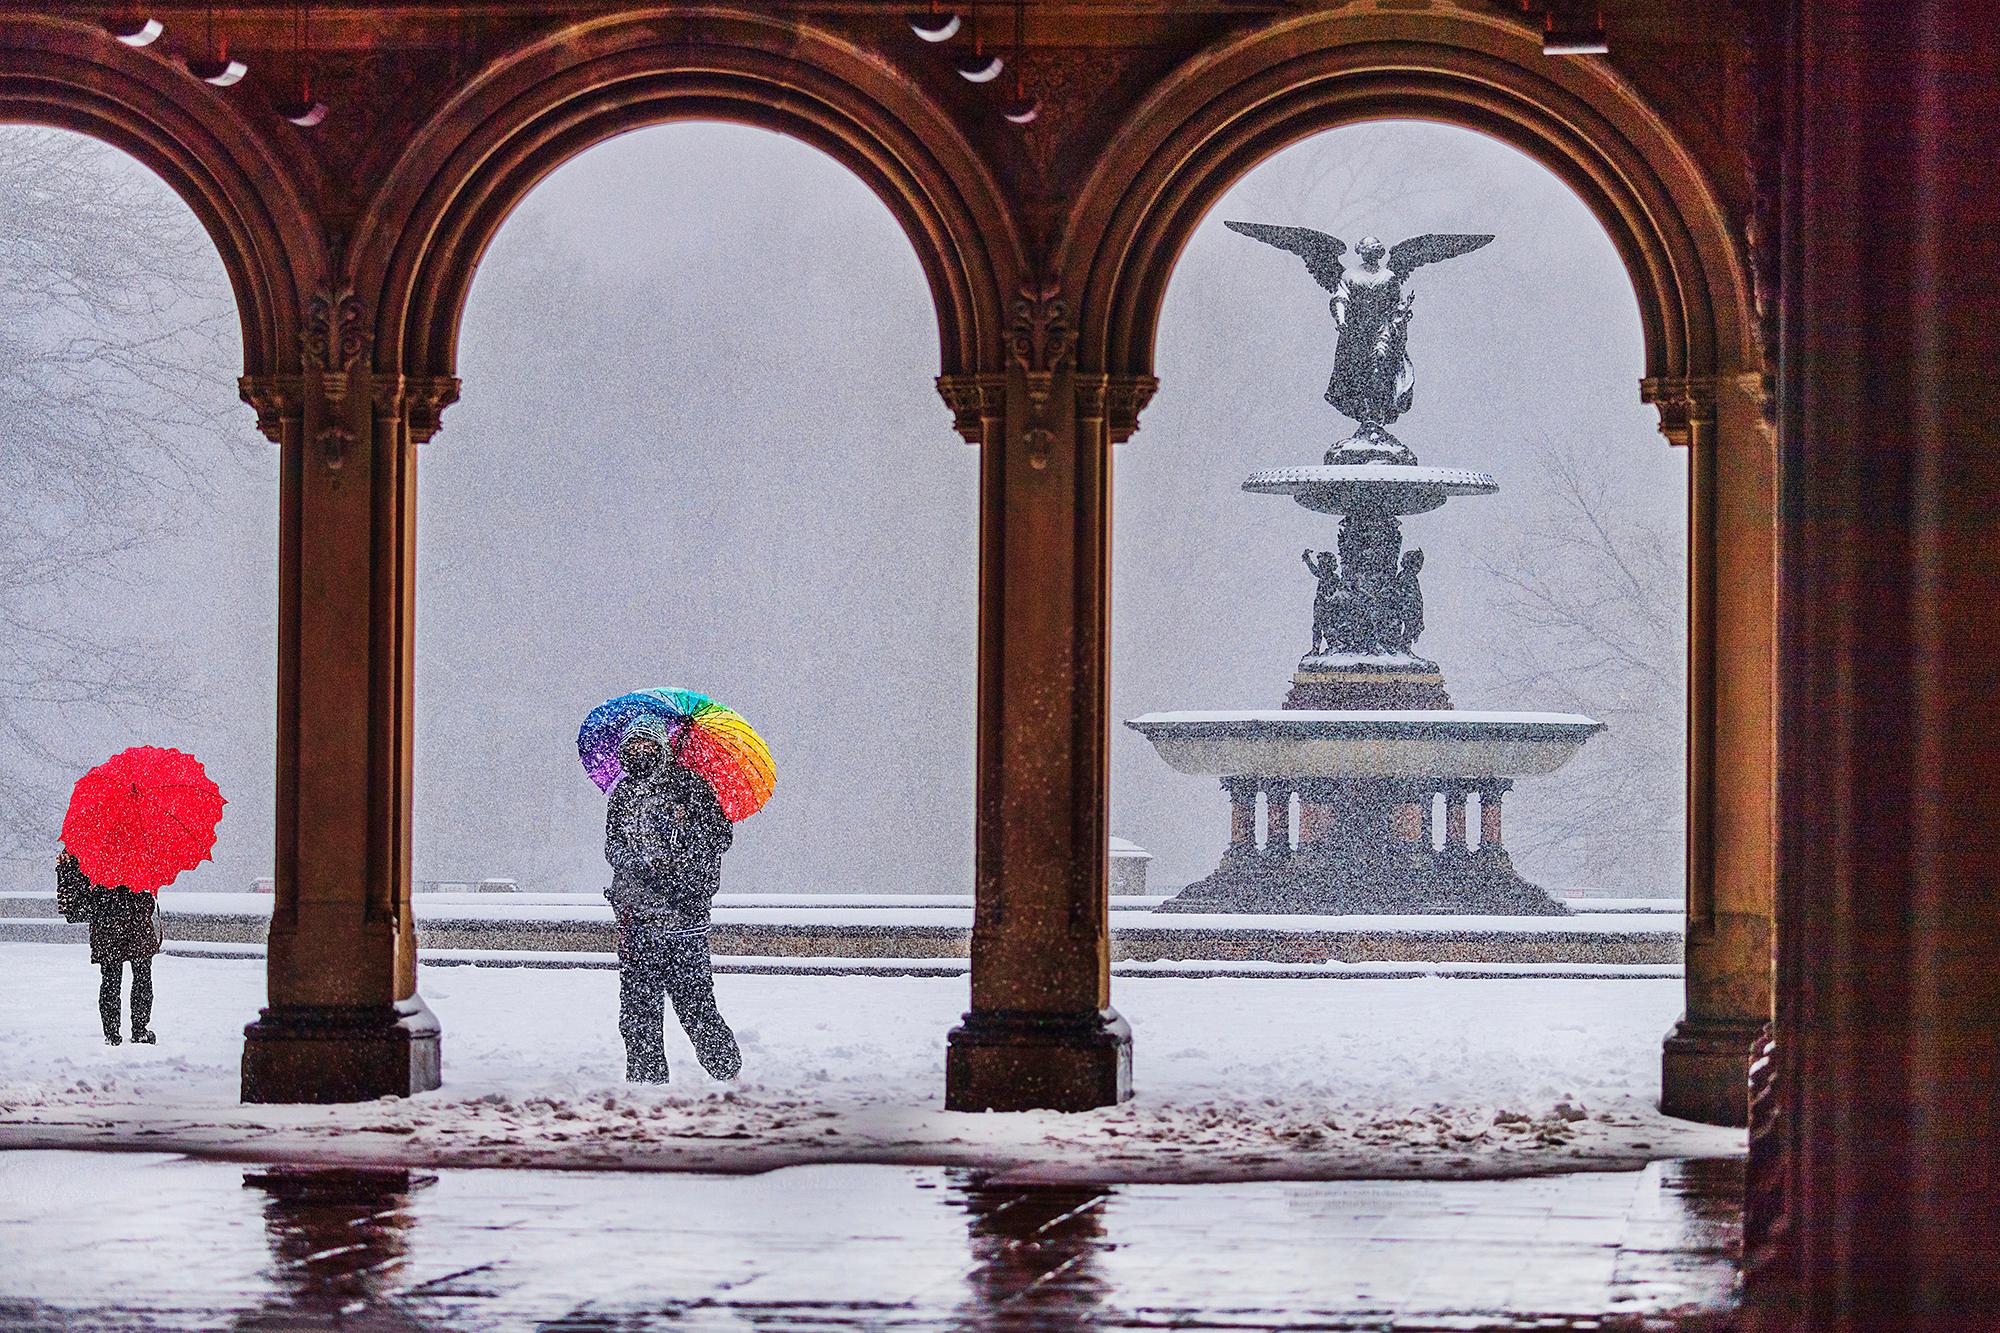 The Bethesda Terrace And Fountain In Snow, Central Park, New York City